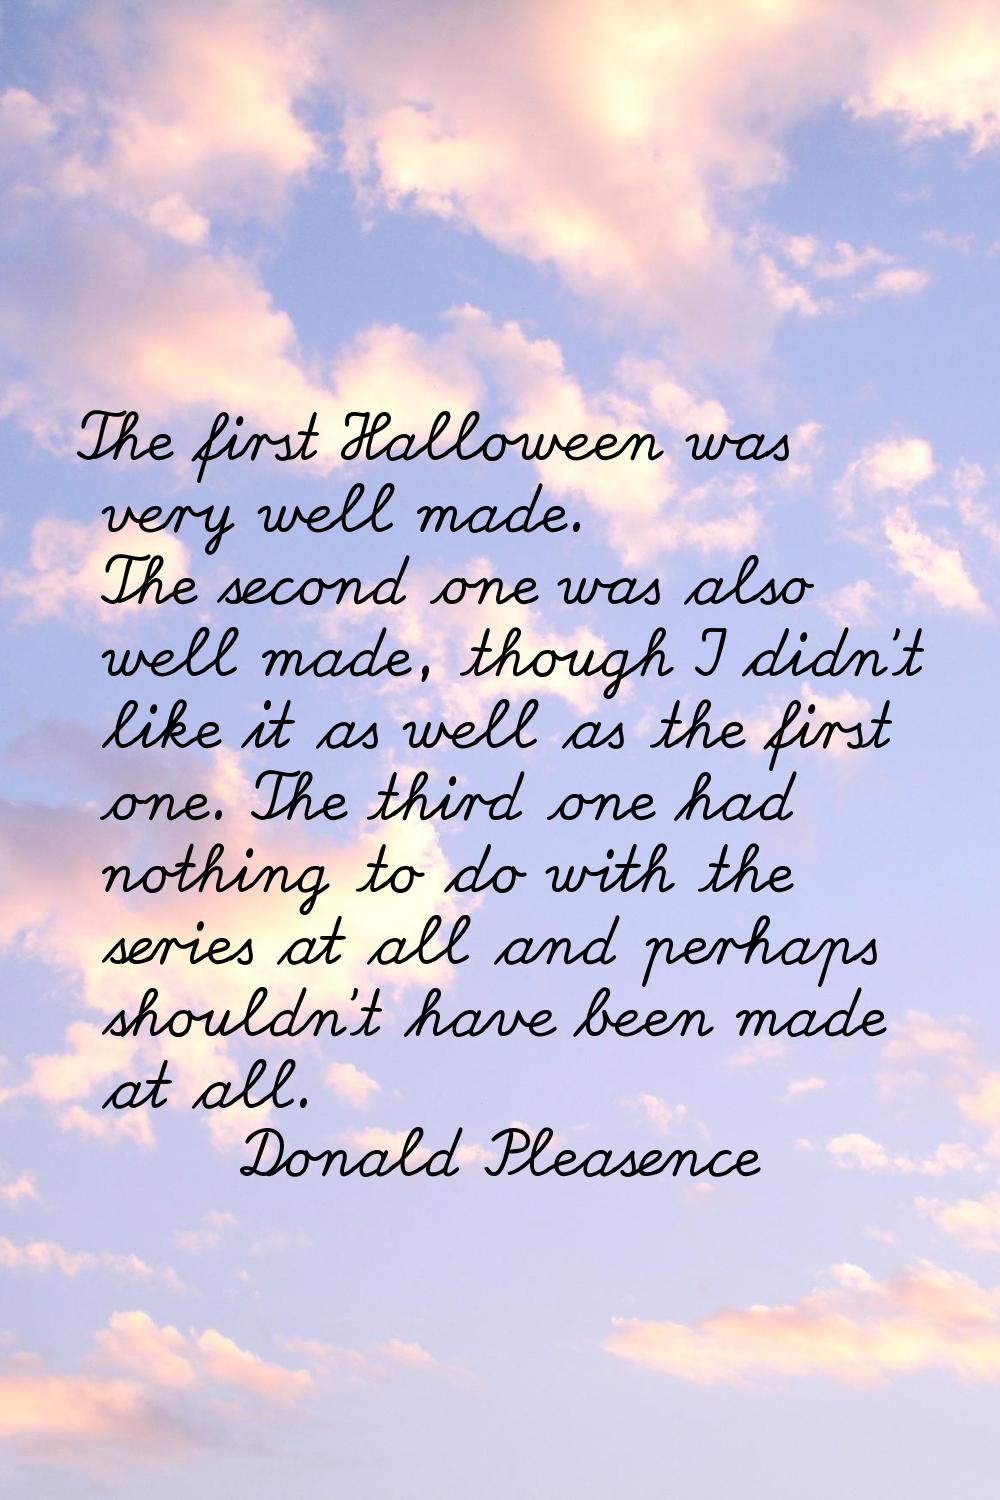 The first Halloween was very well made. The second one was also well made, though I didn't like it 